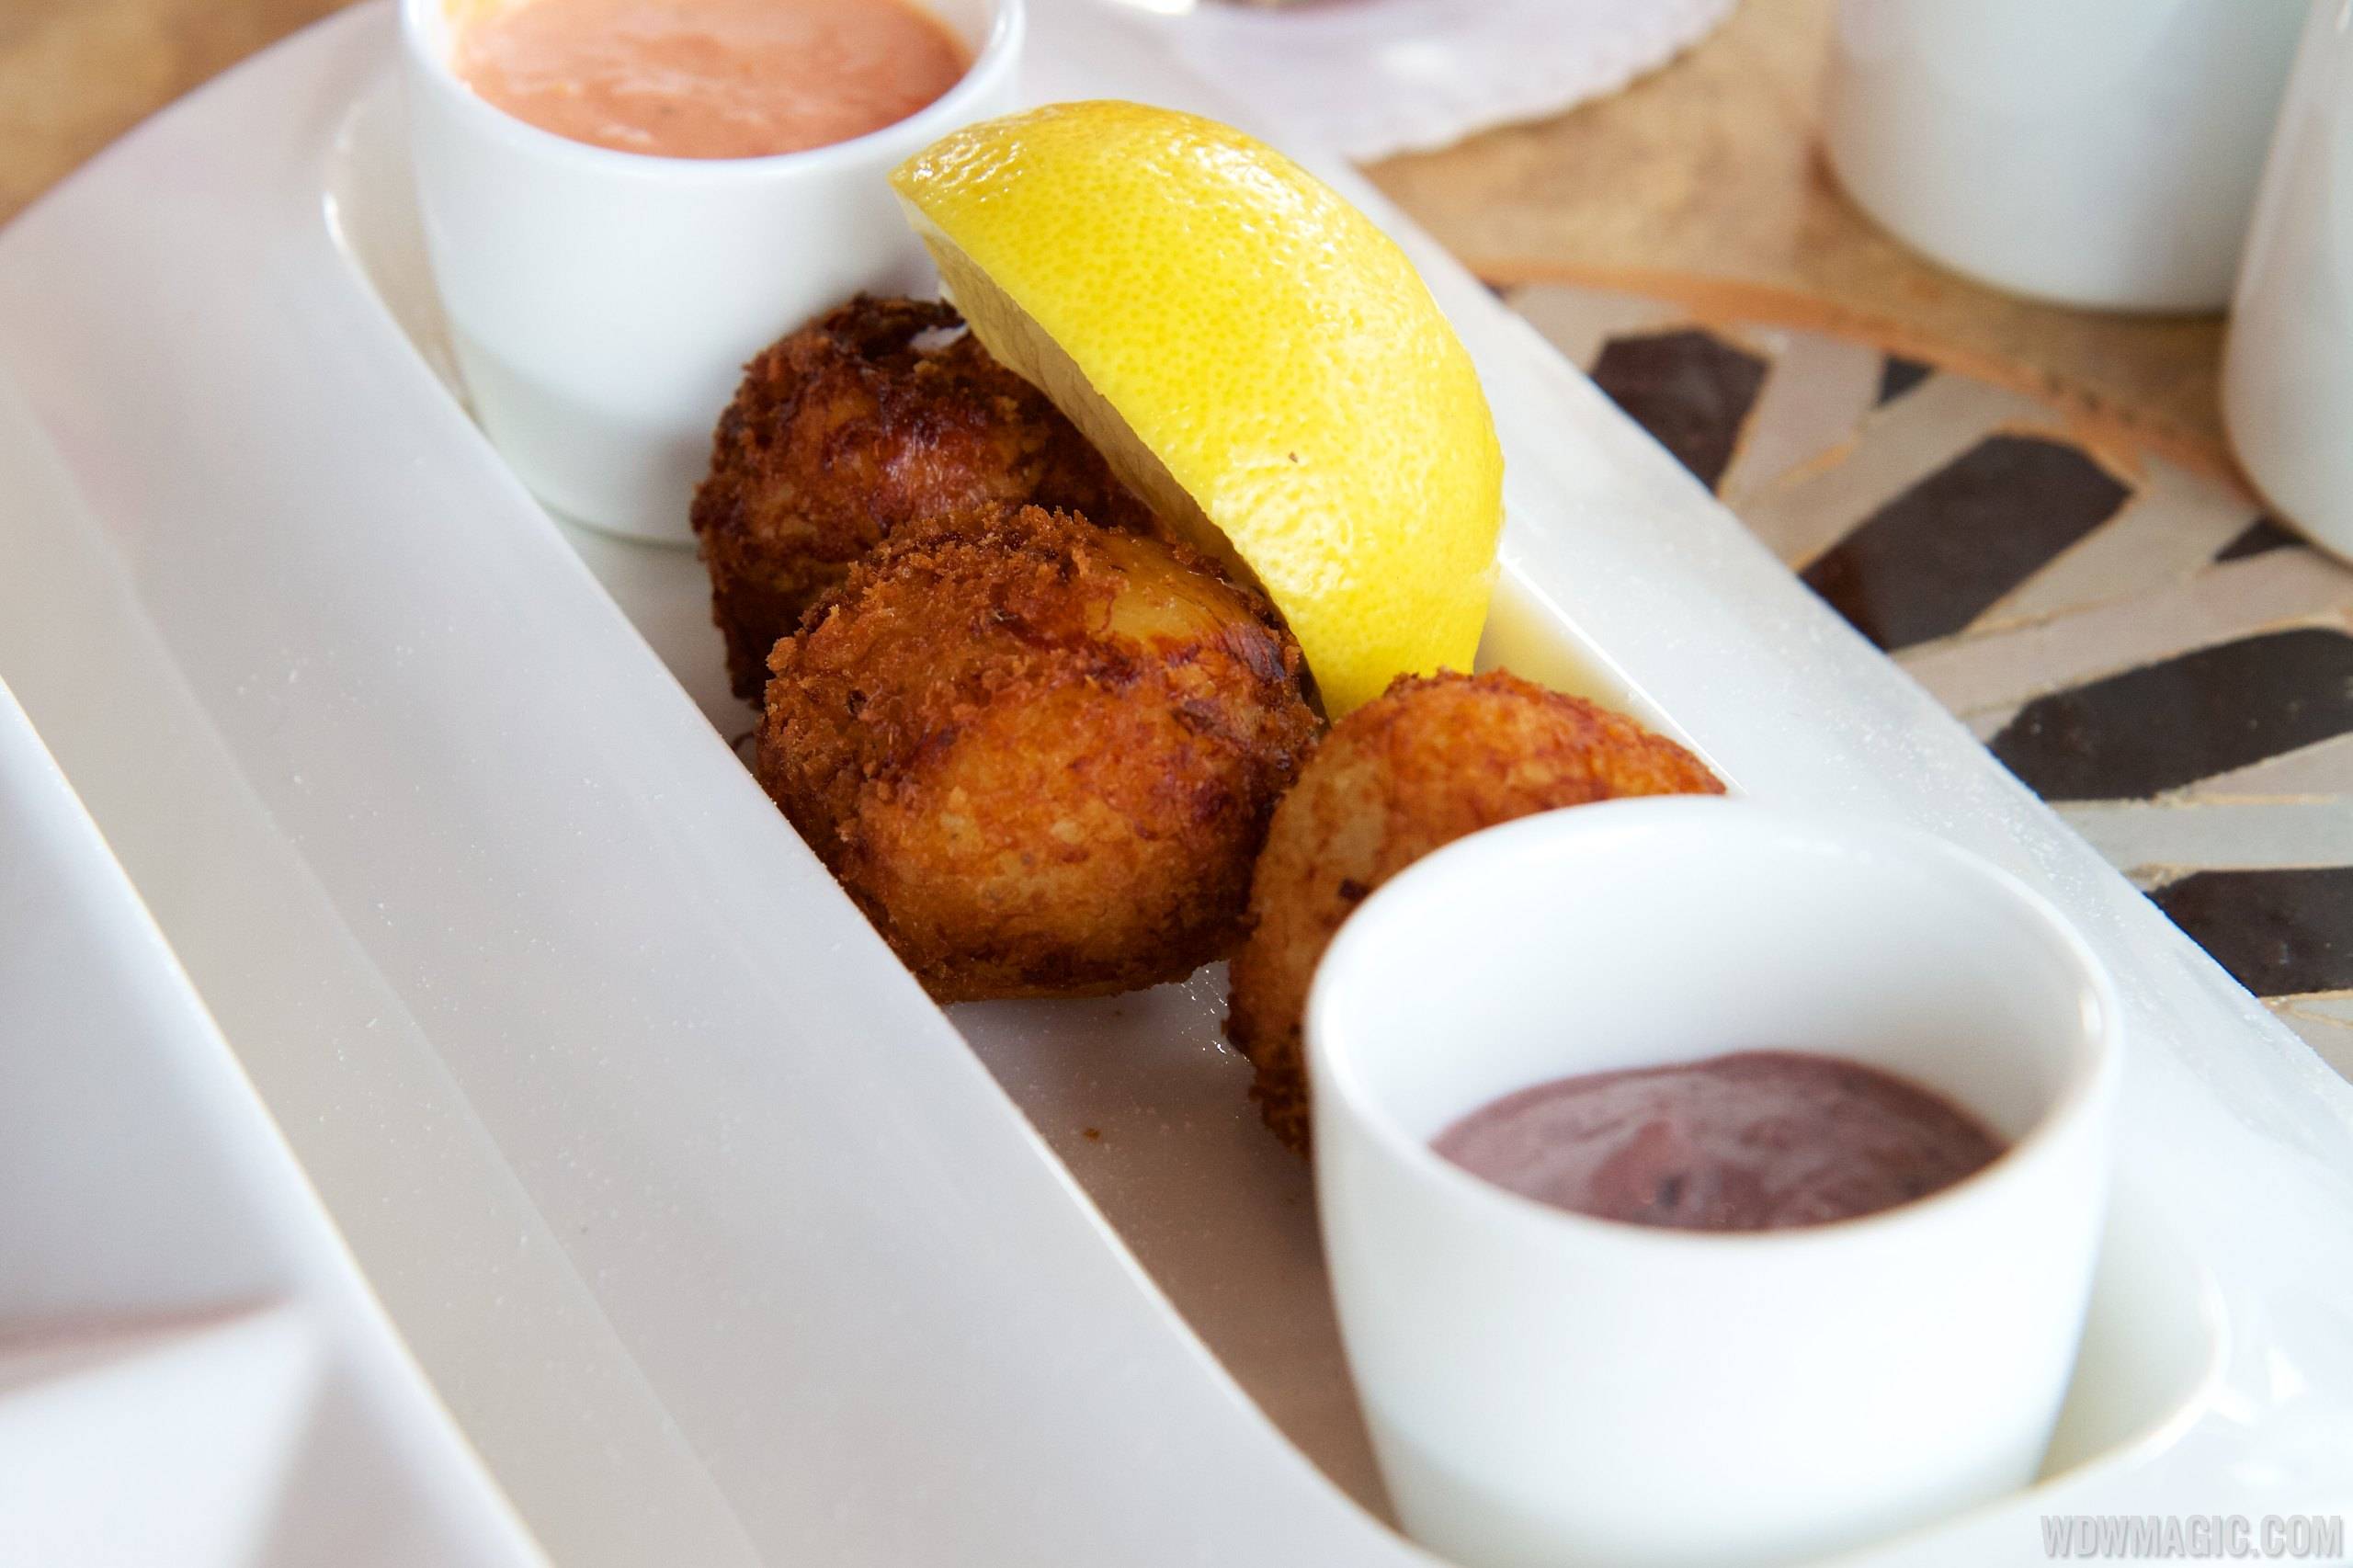 Spice Road Table - Salted Cod Croquettes $10